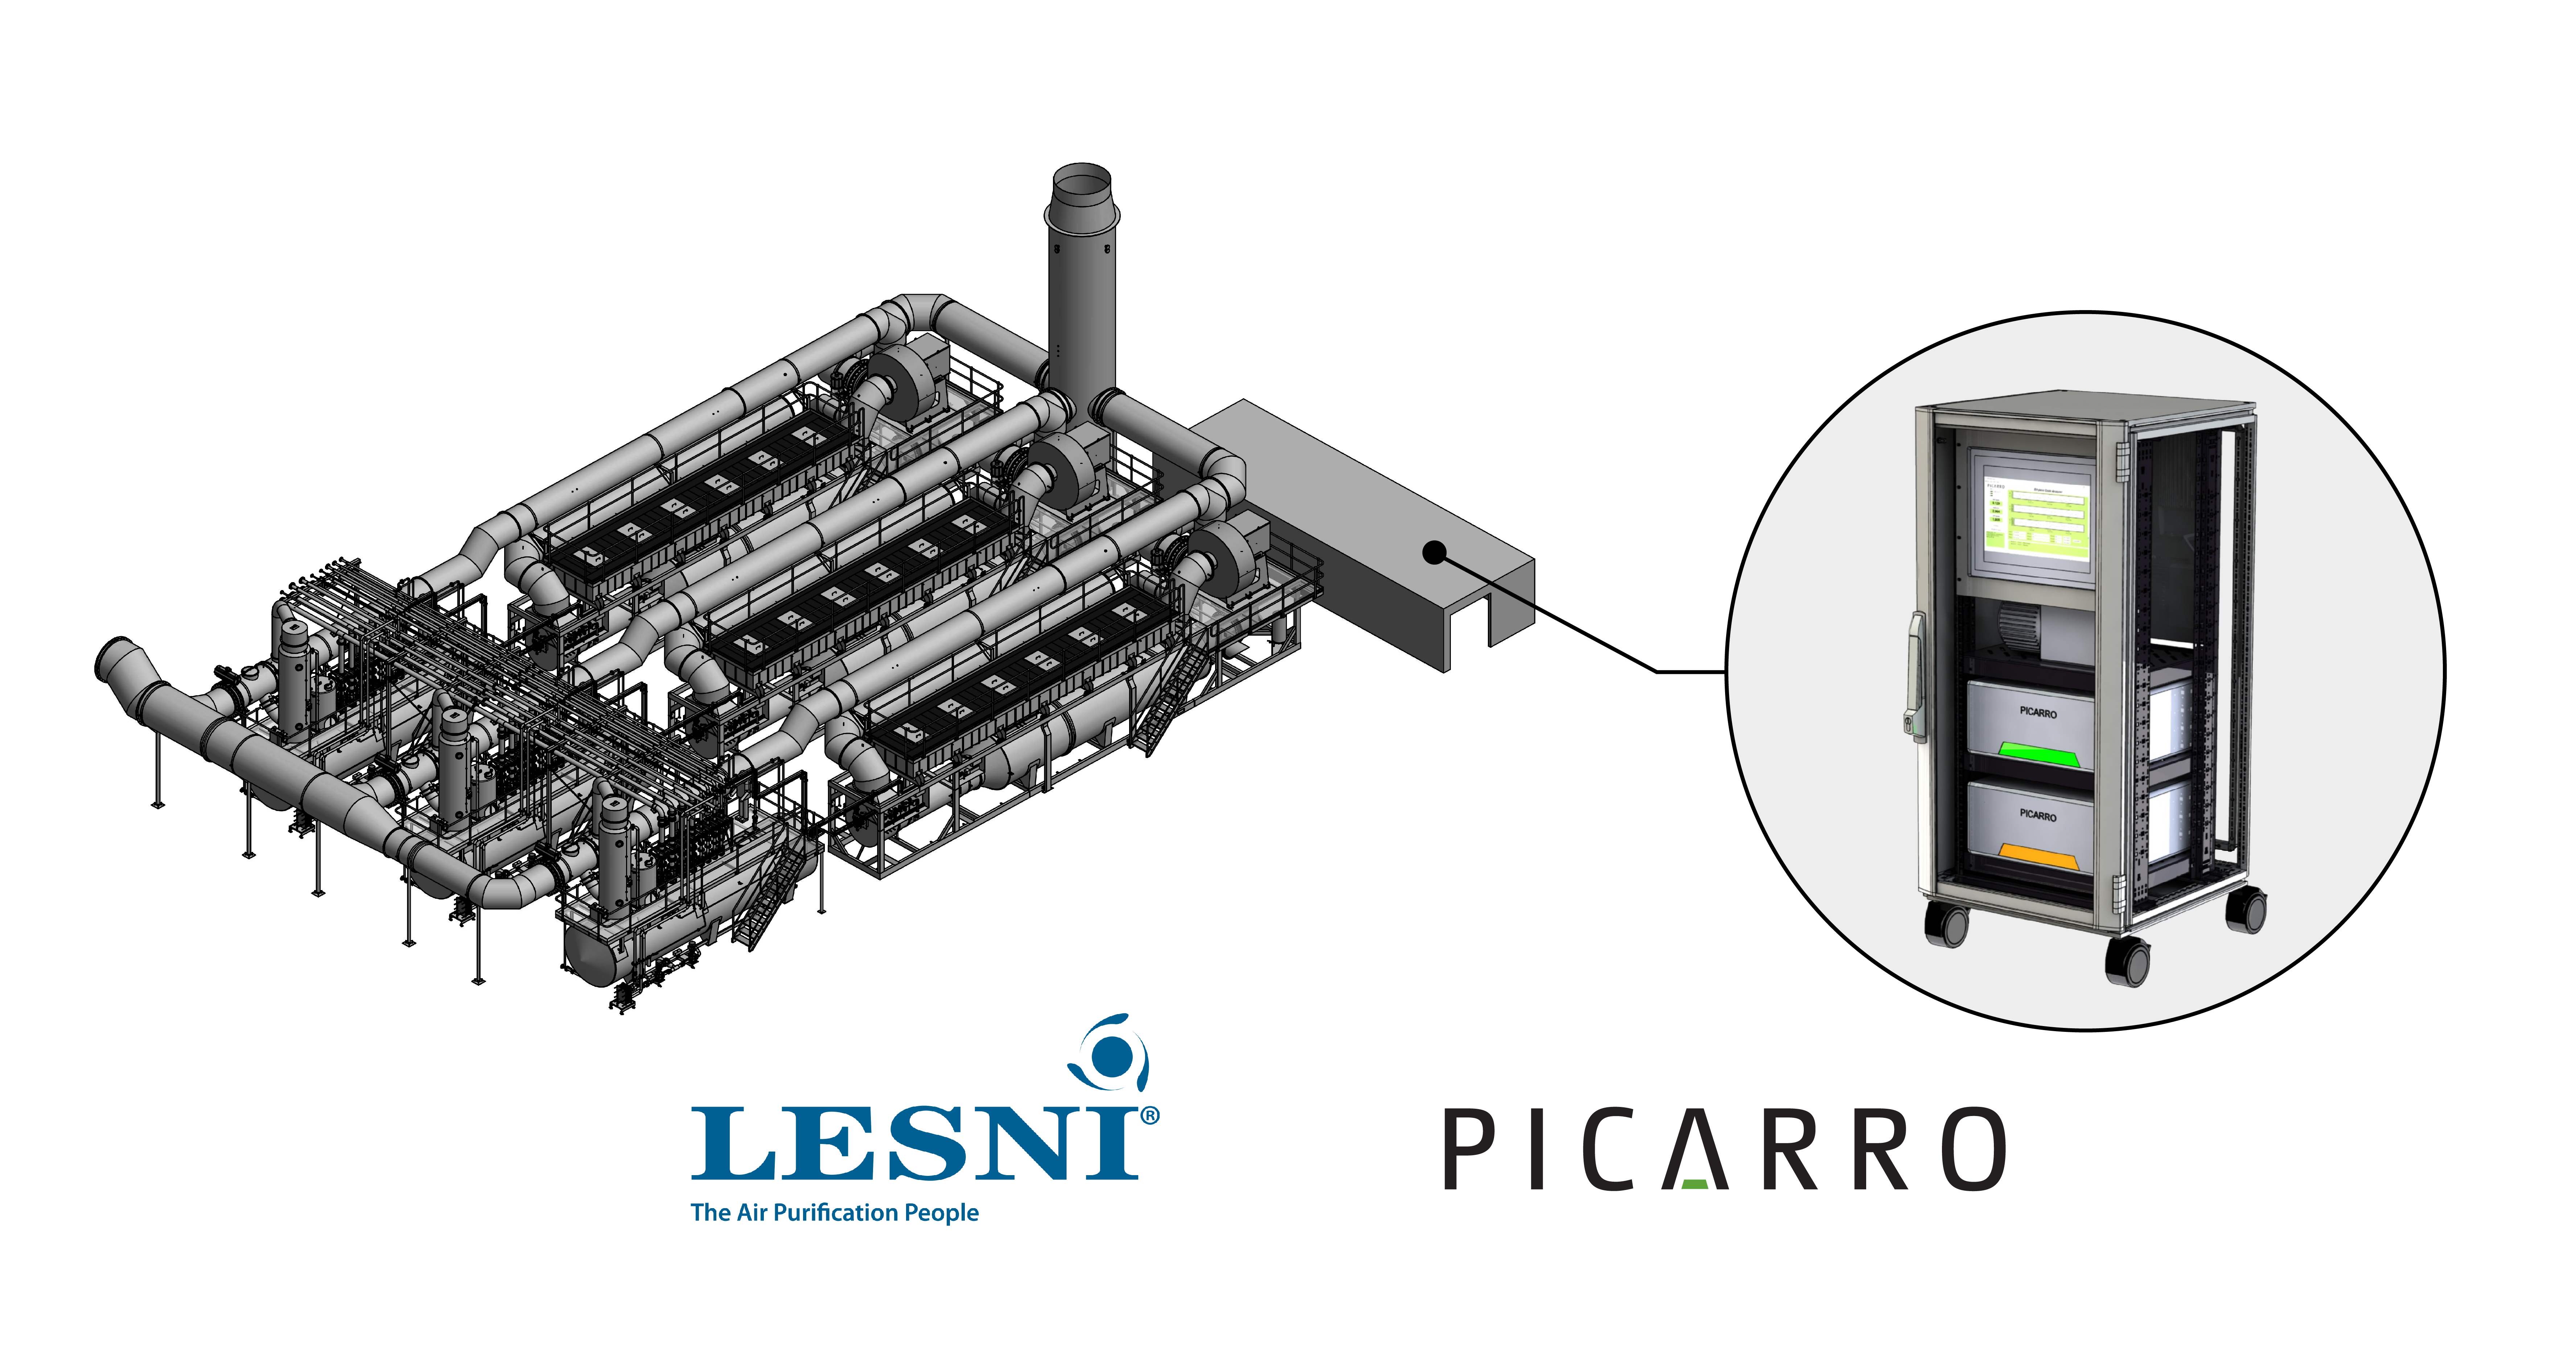 LESNI and Picarro Ethylene Oxide Monitoring Solutions